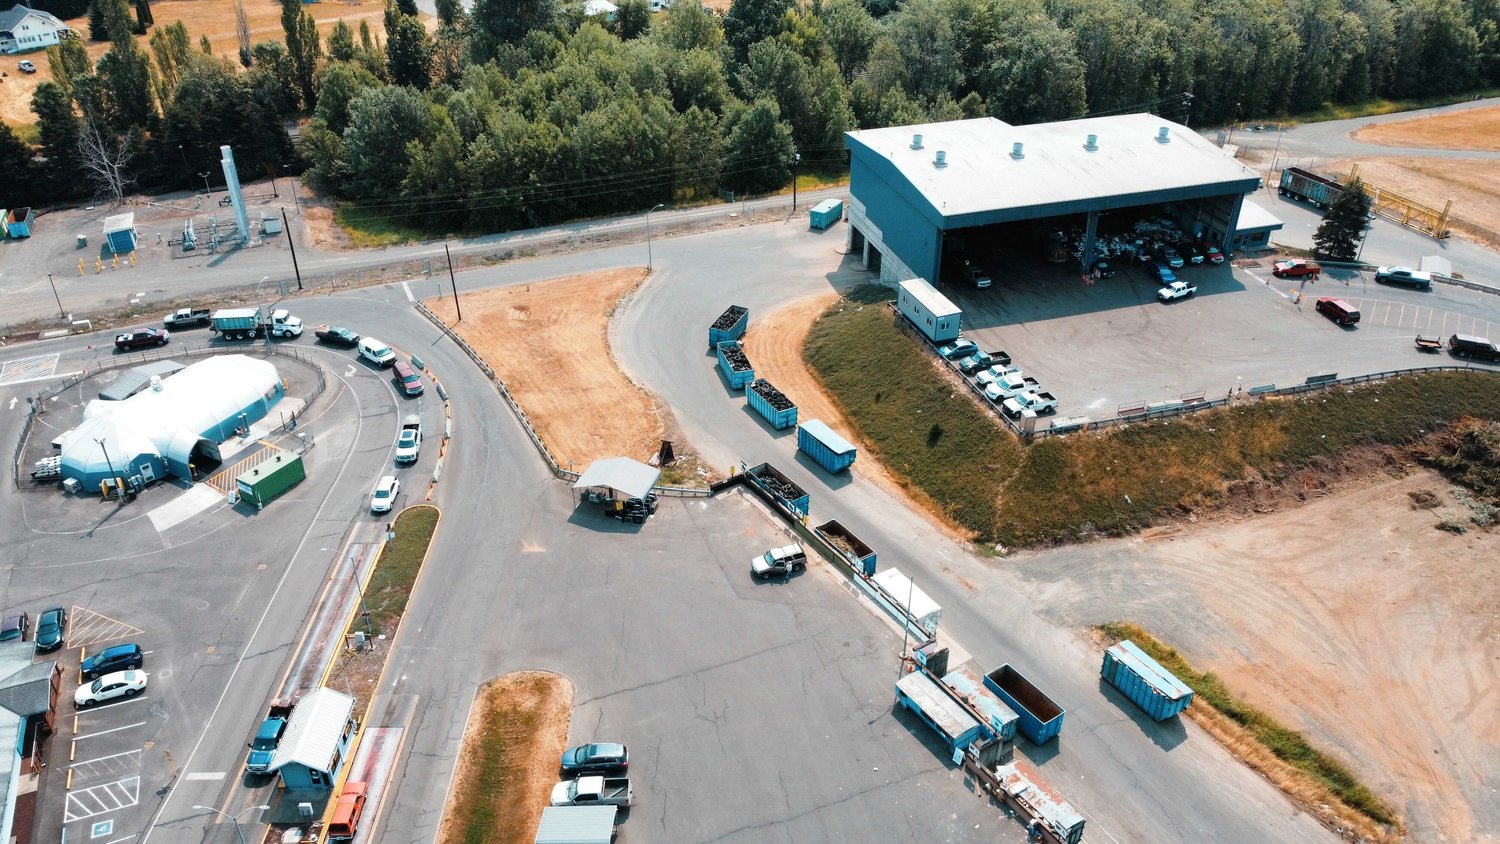 FILE PHOTO — The Lewis County Central Transfer Station